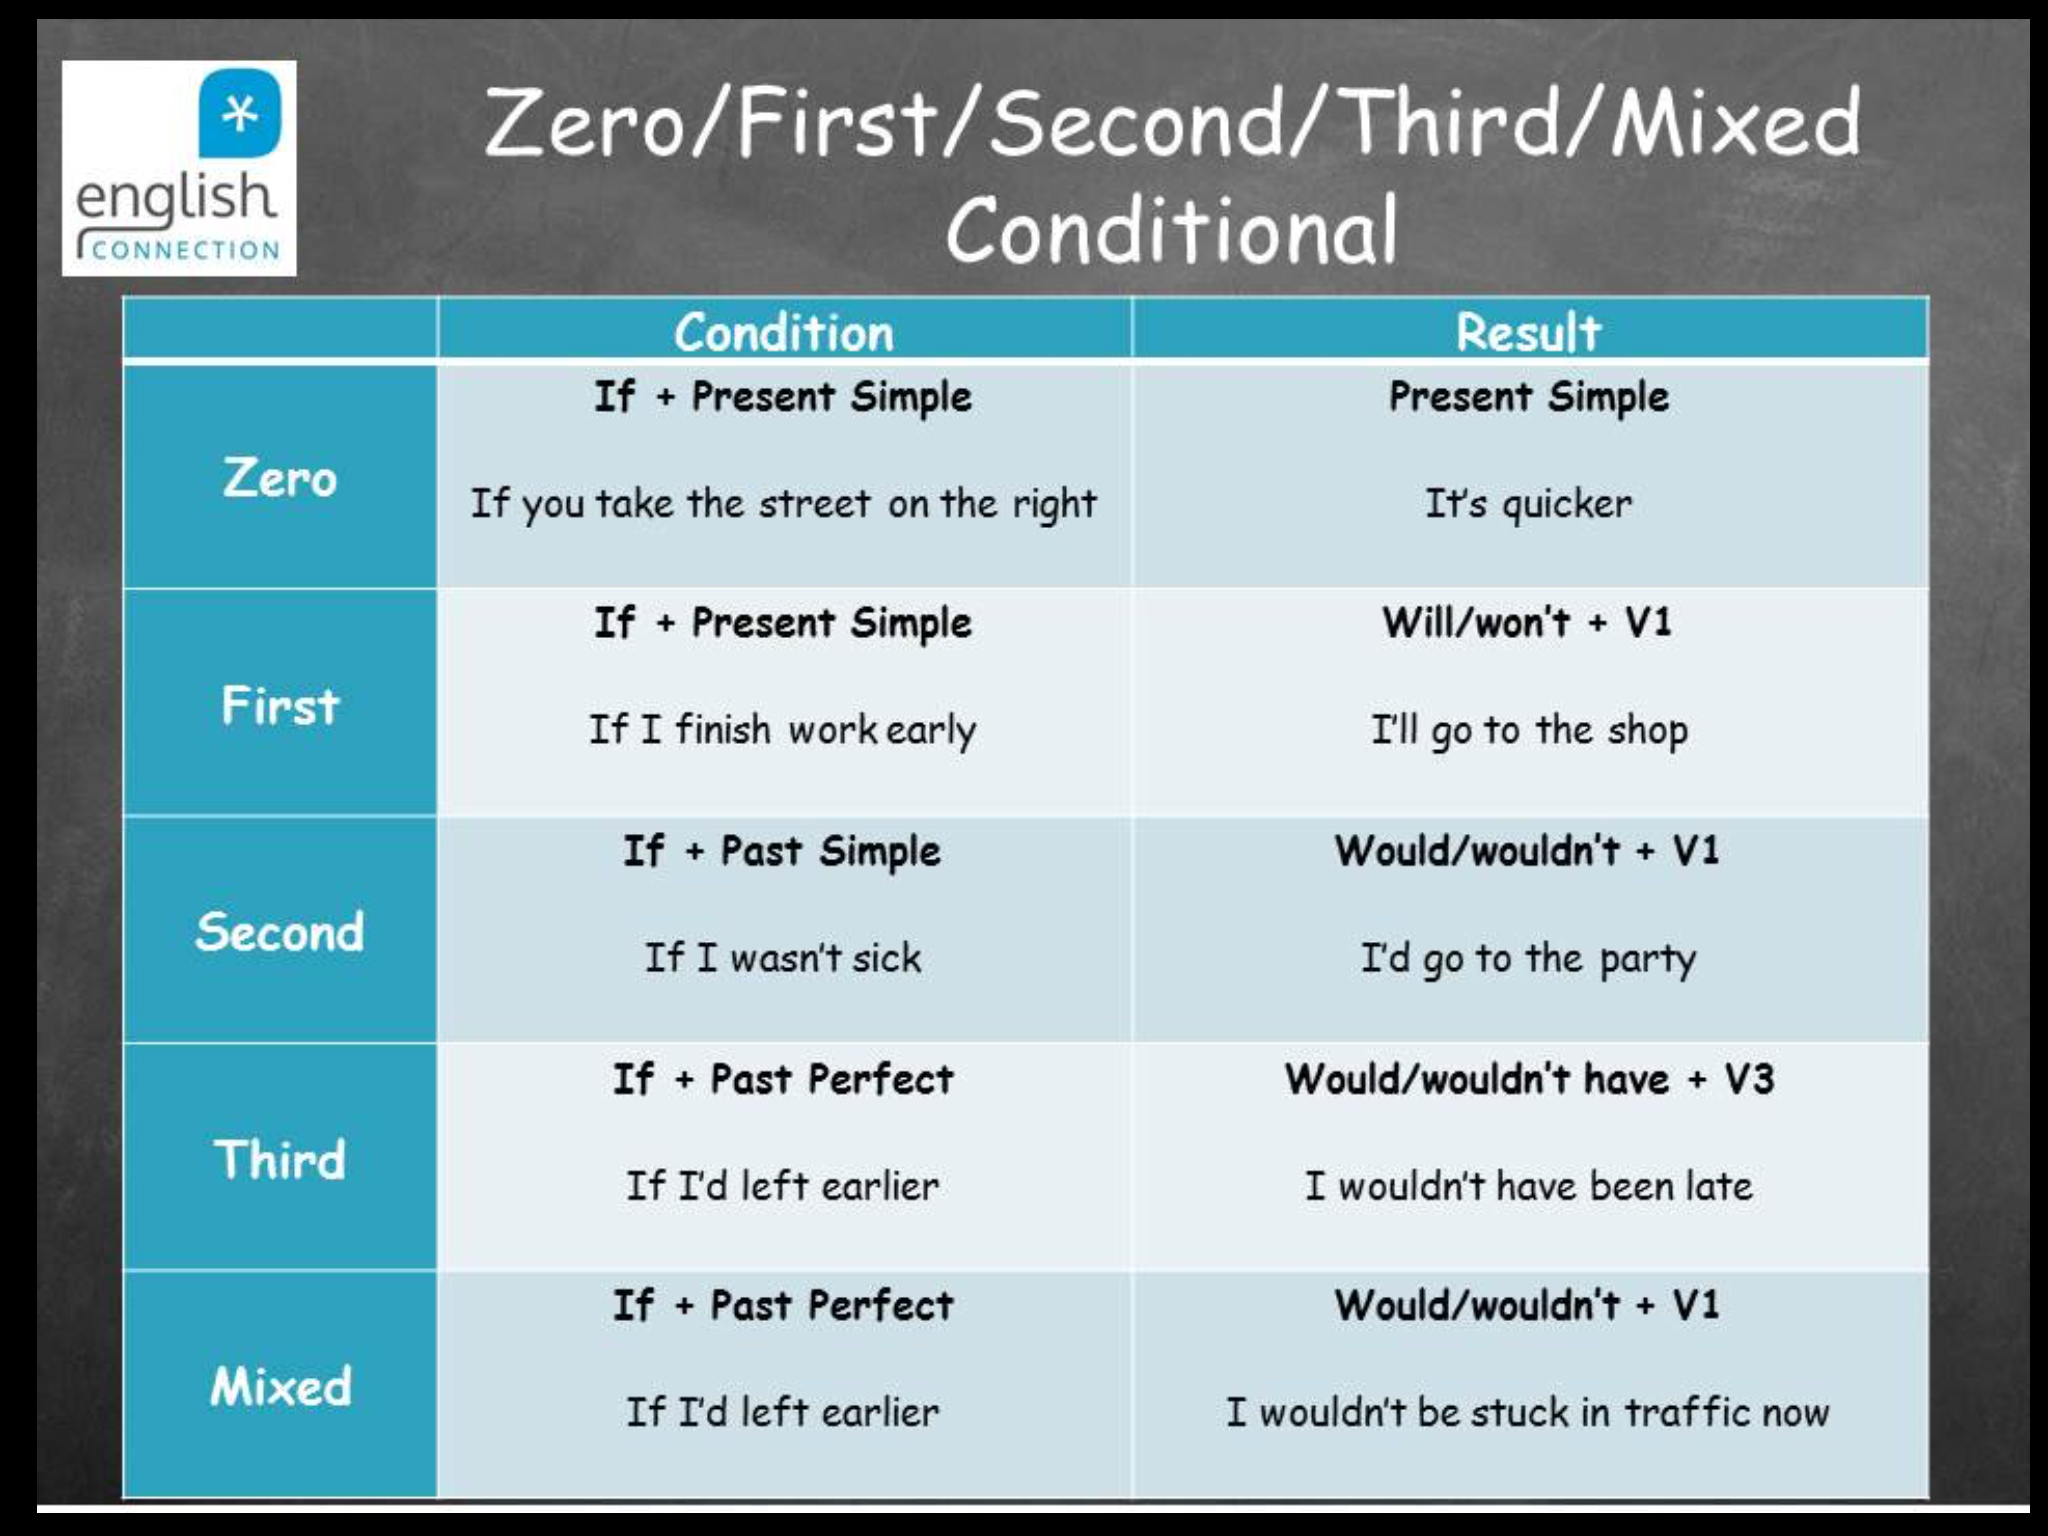 Английский first conditional. Zero first and second conditionals правила. Таблица Zero first second conditional. Type 0 1 2 3 conditionals таблица. Английский first and second conditional.